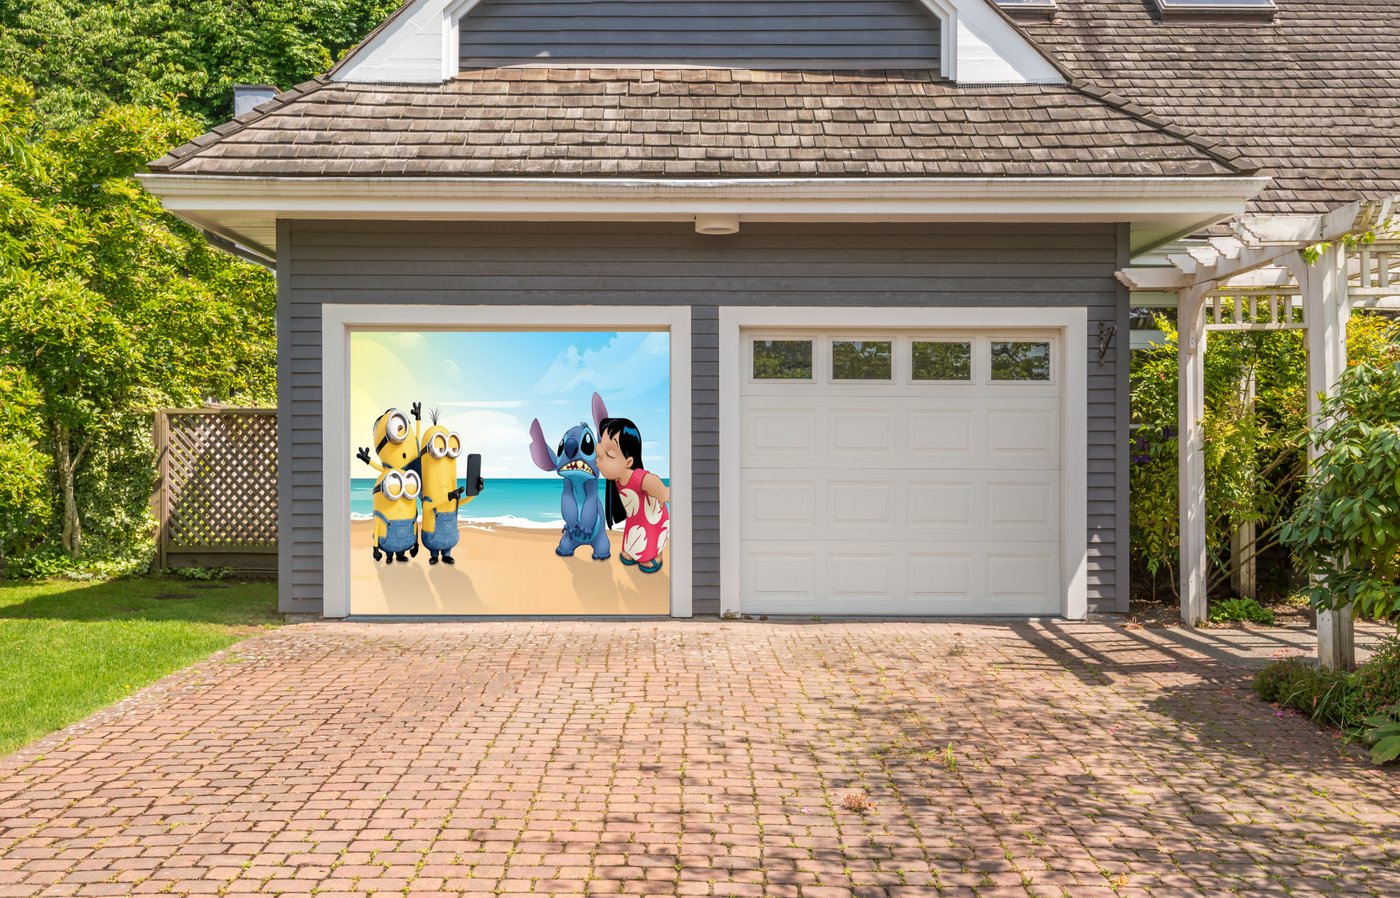 Minions With Lilo And Stitch On The Beach Garage Door Cover Banner Backdrop